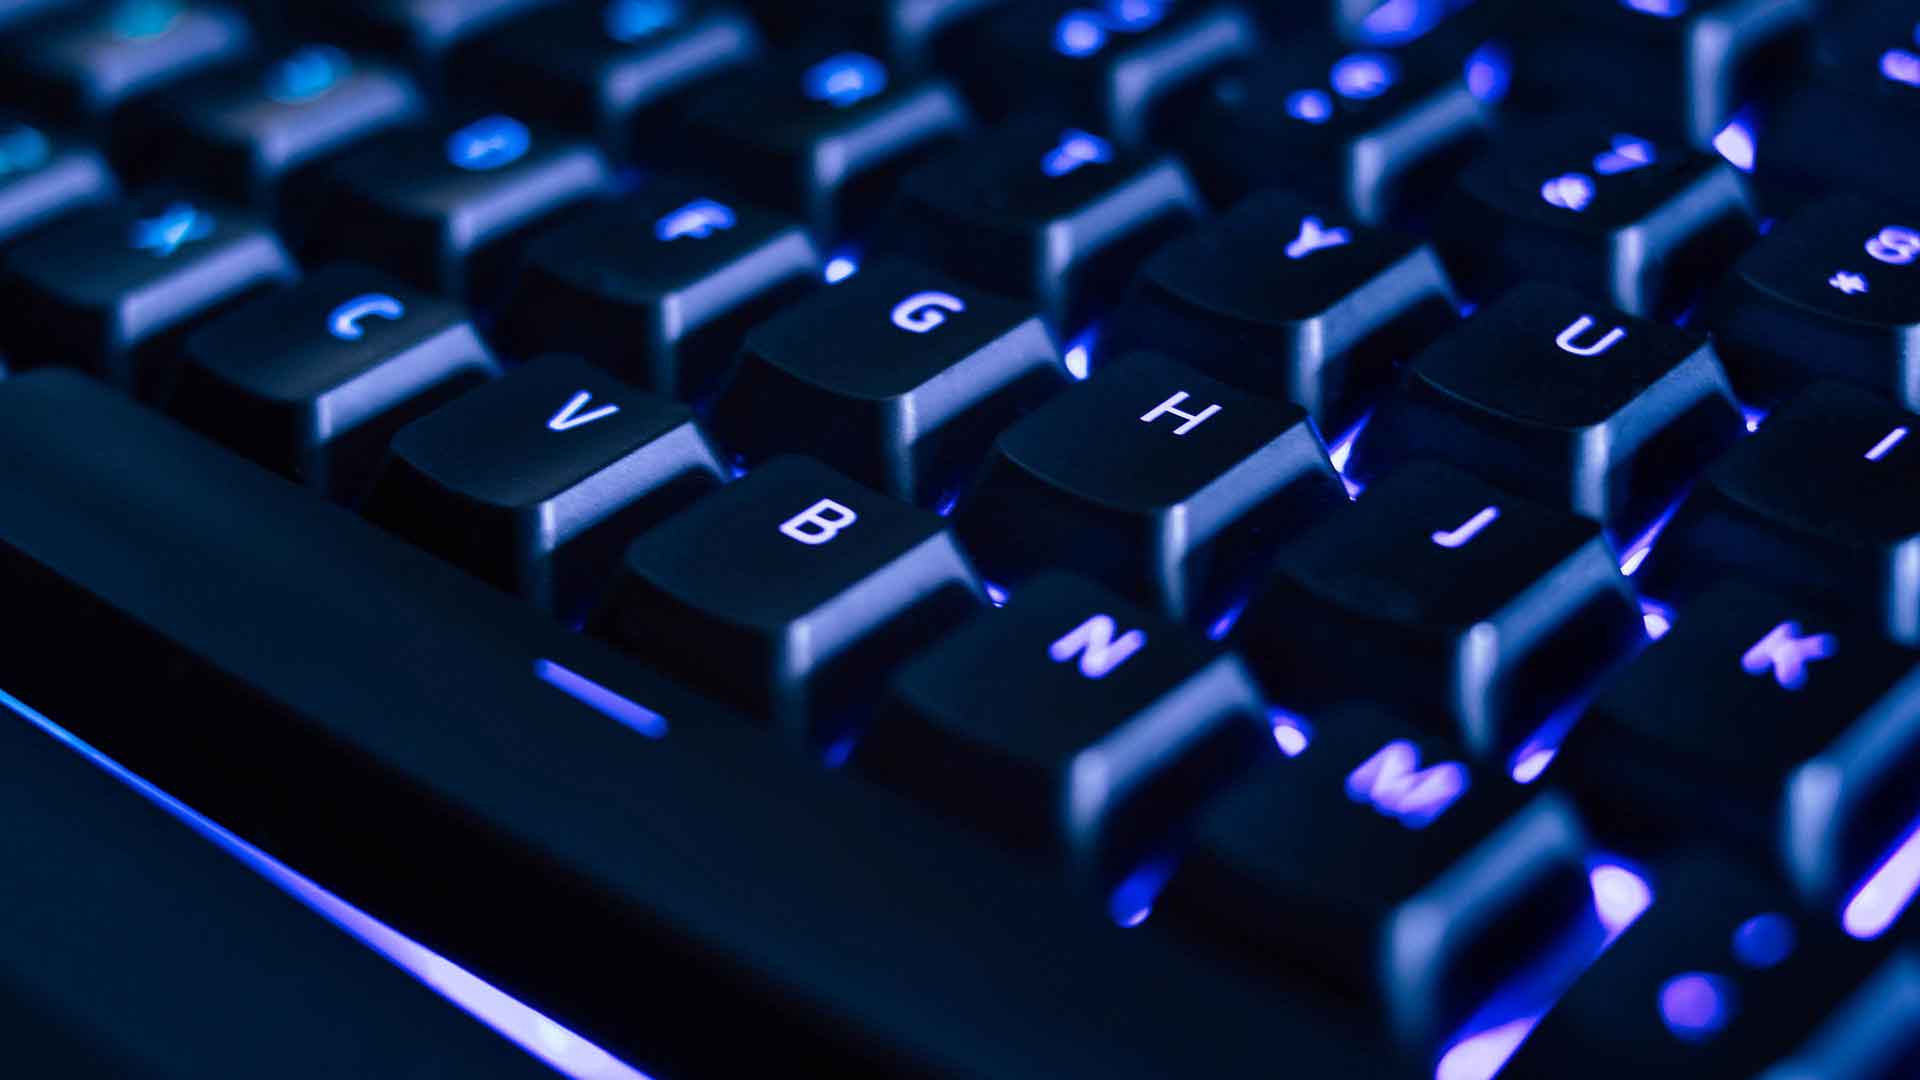 A computer keyboard represents cybersecurity, IT mapping